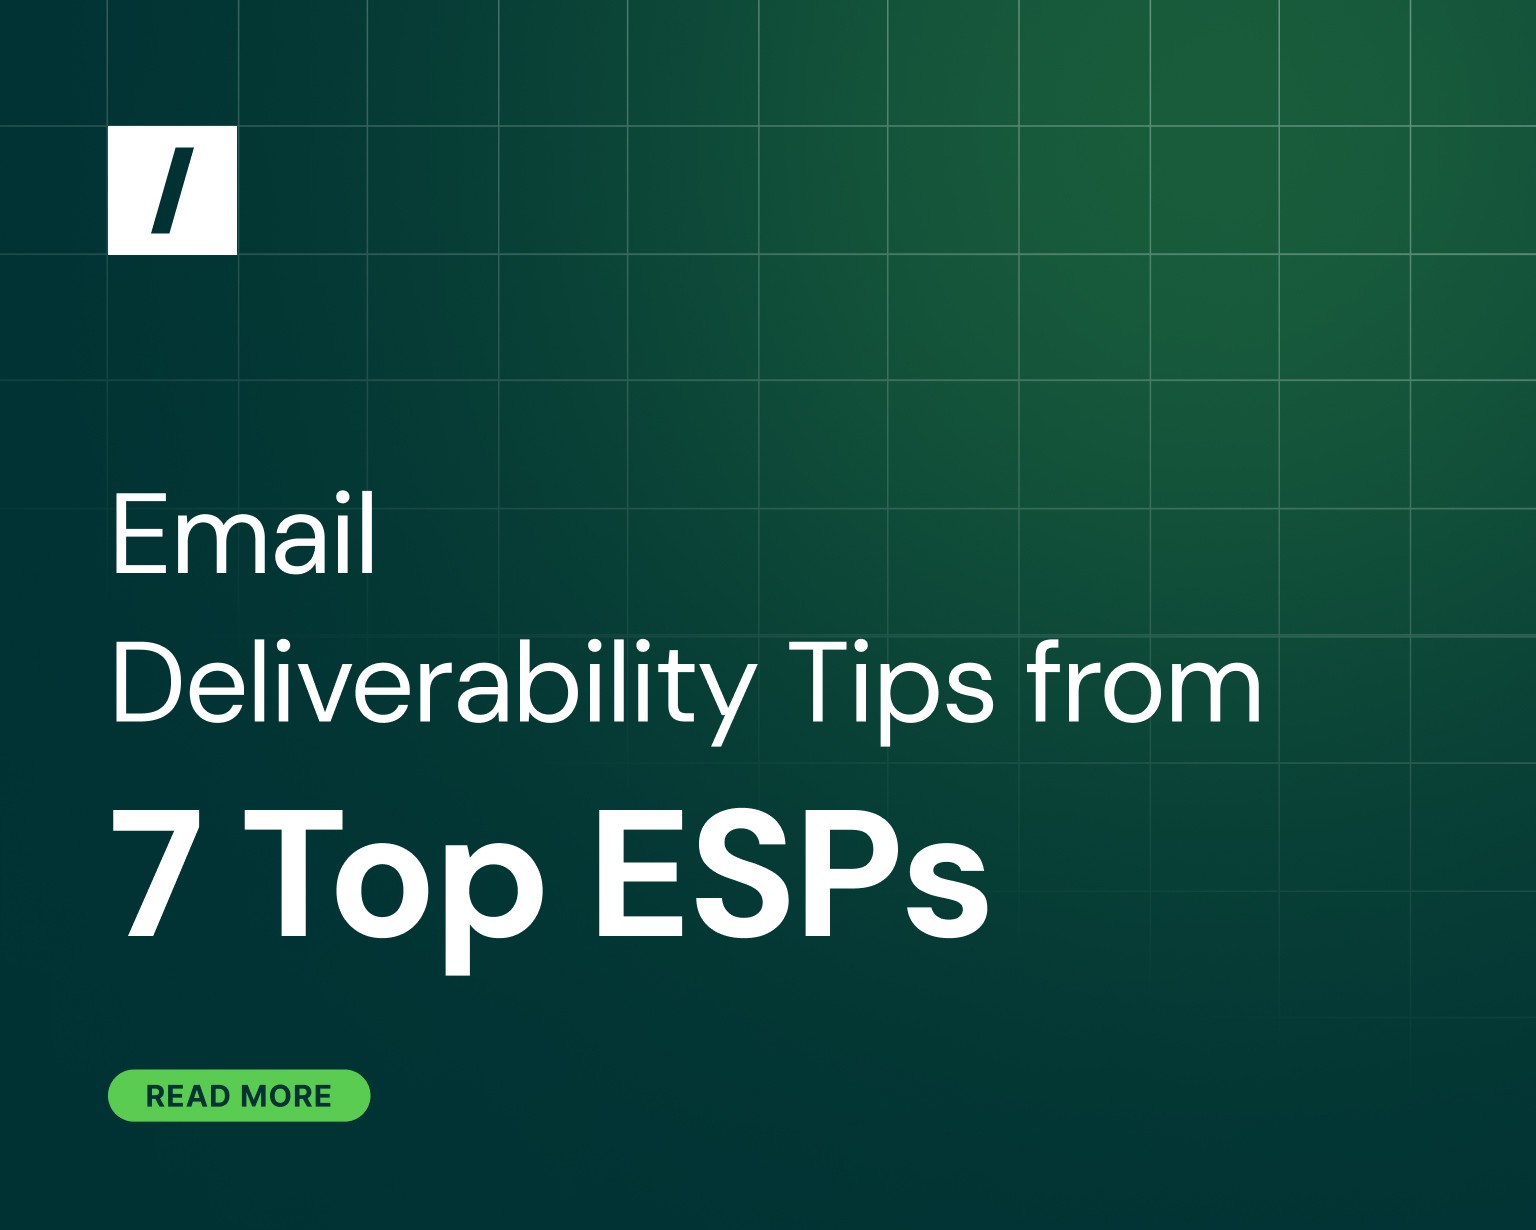 Email Deliverability tips from 7 top ESPs for newsletters